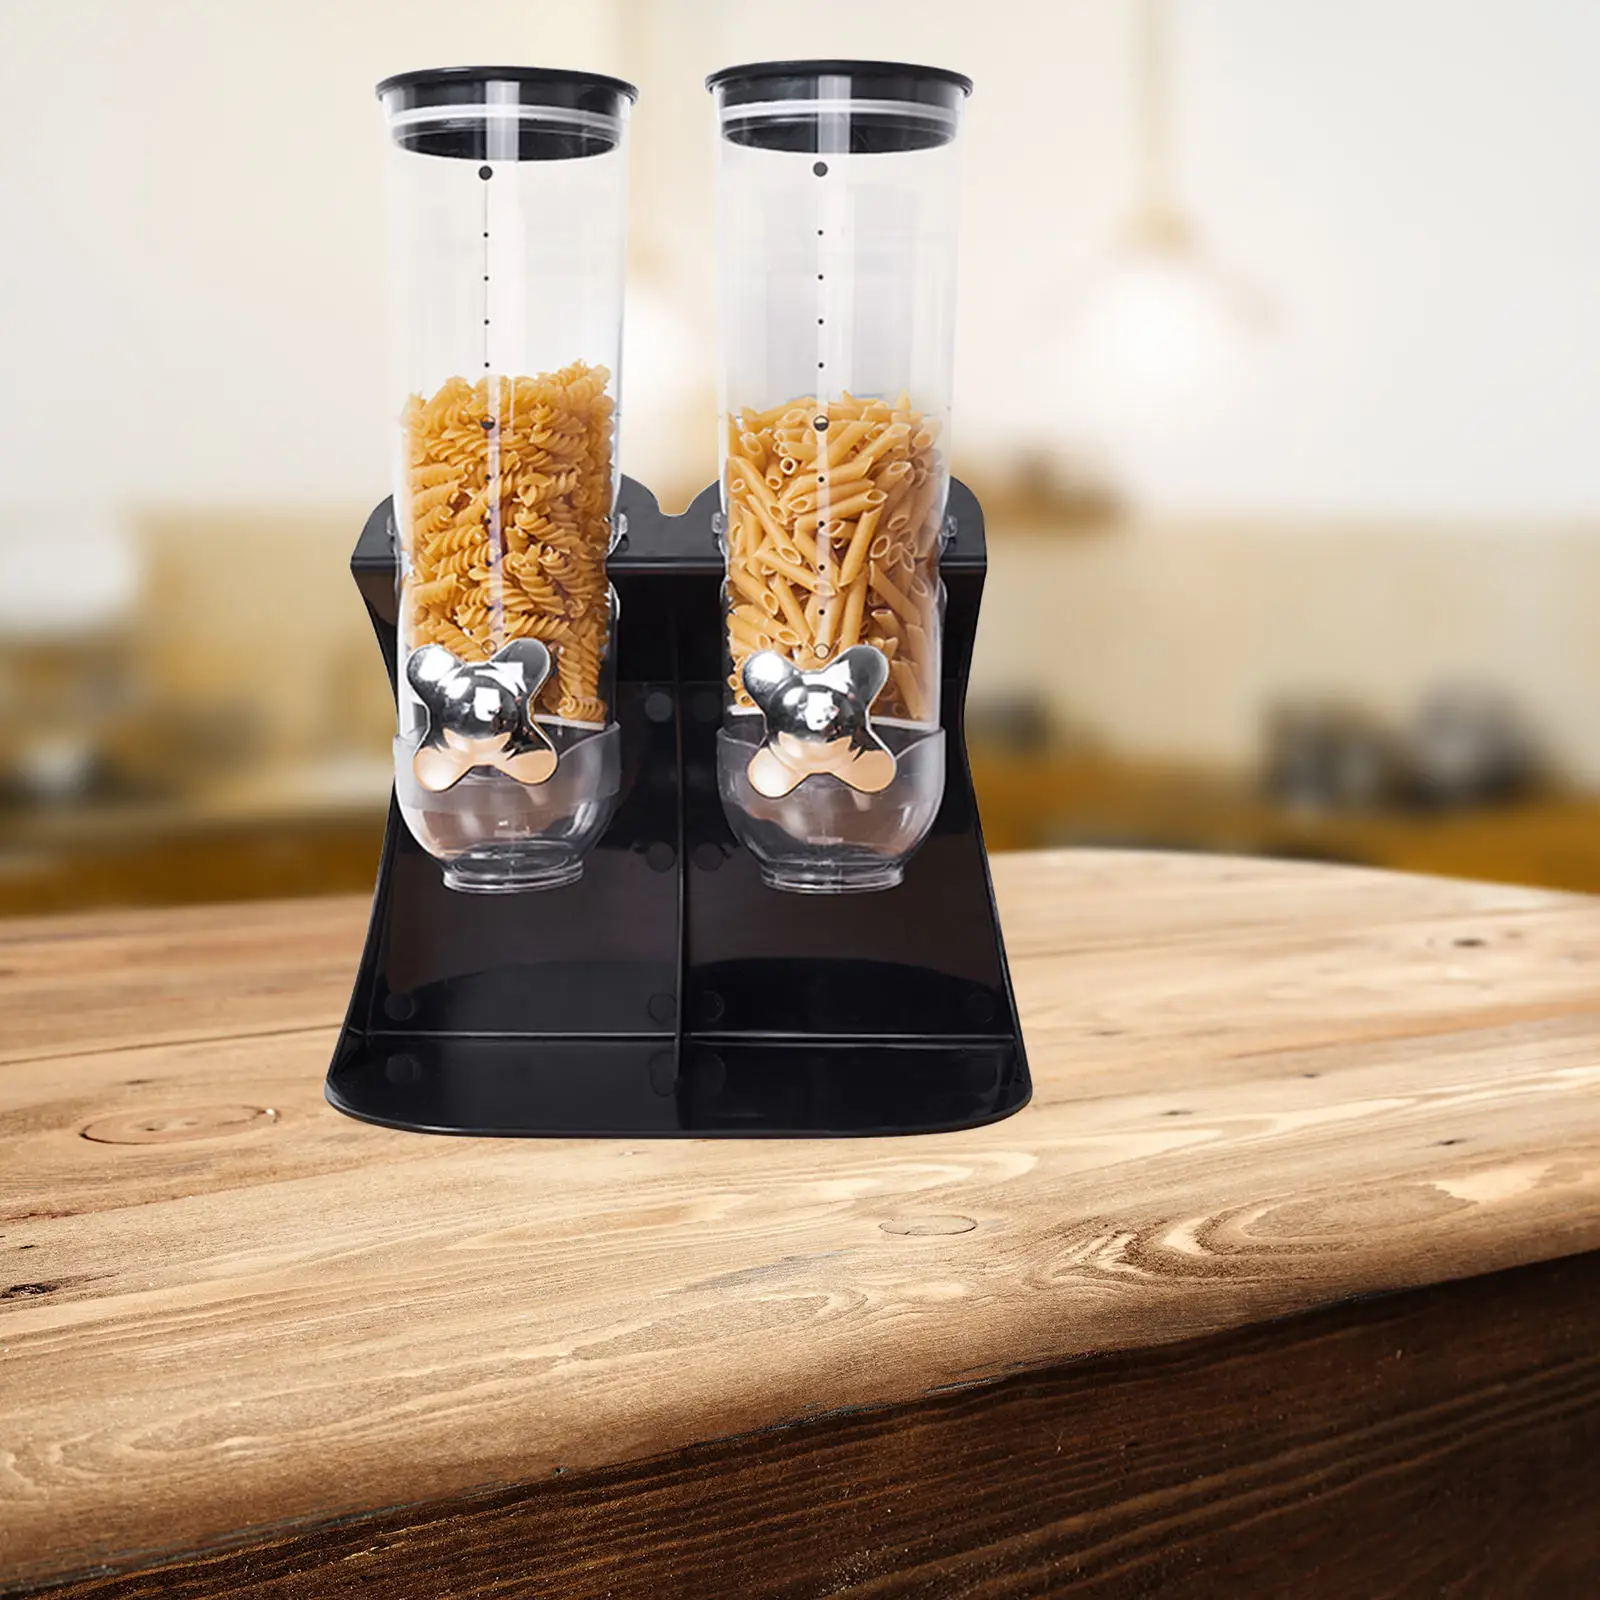 Dry Food Dispenser Holder Countertop for Cereal Oatmeal Nuts Black/Chrome